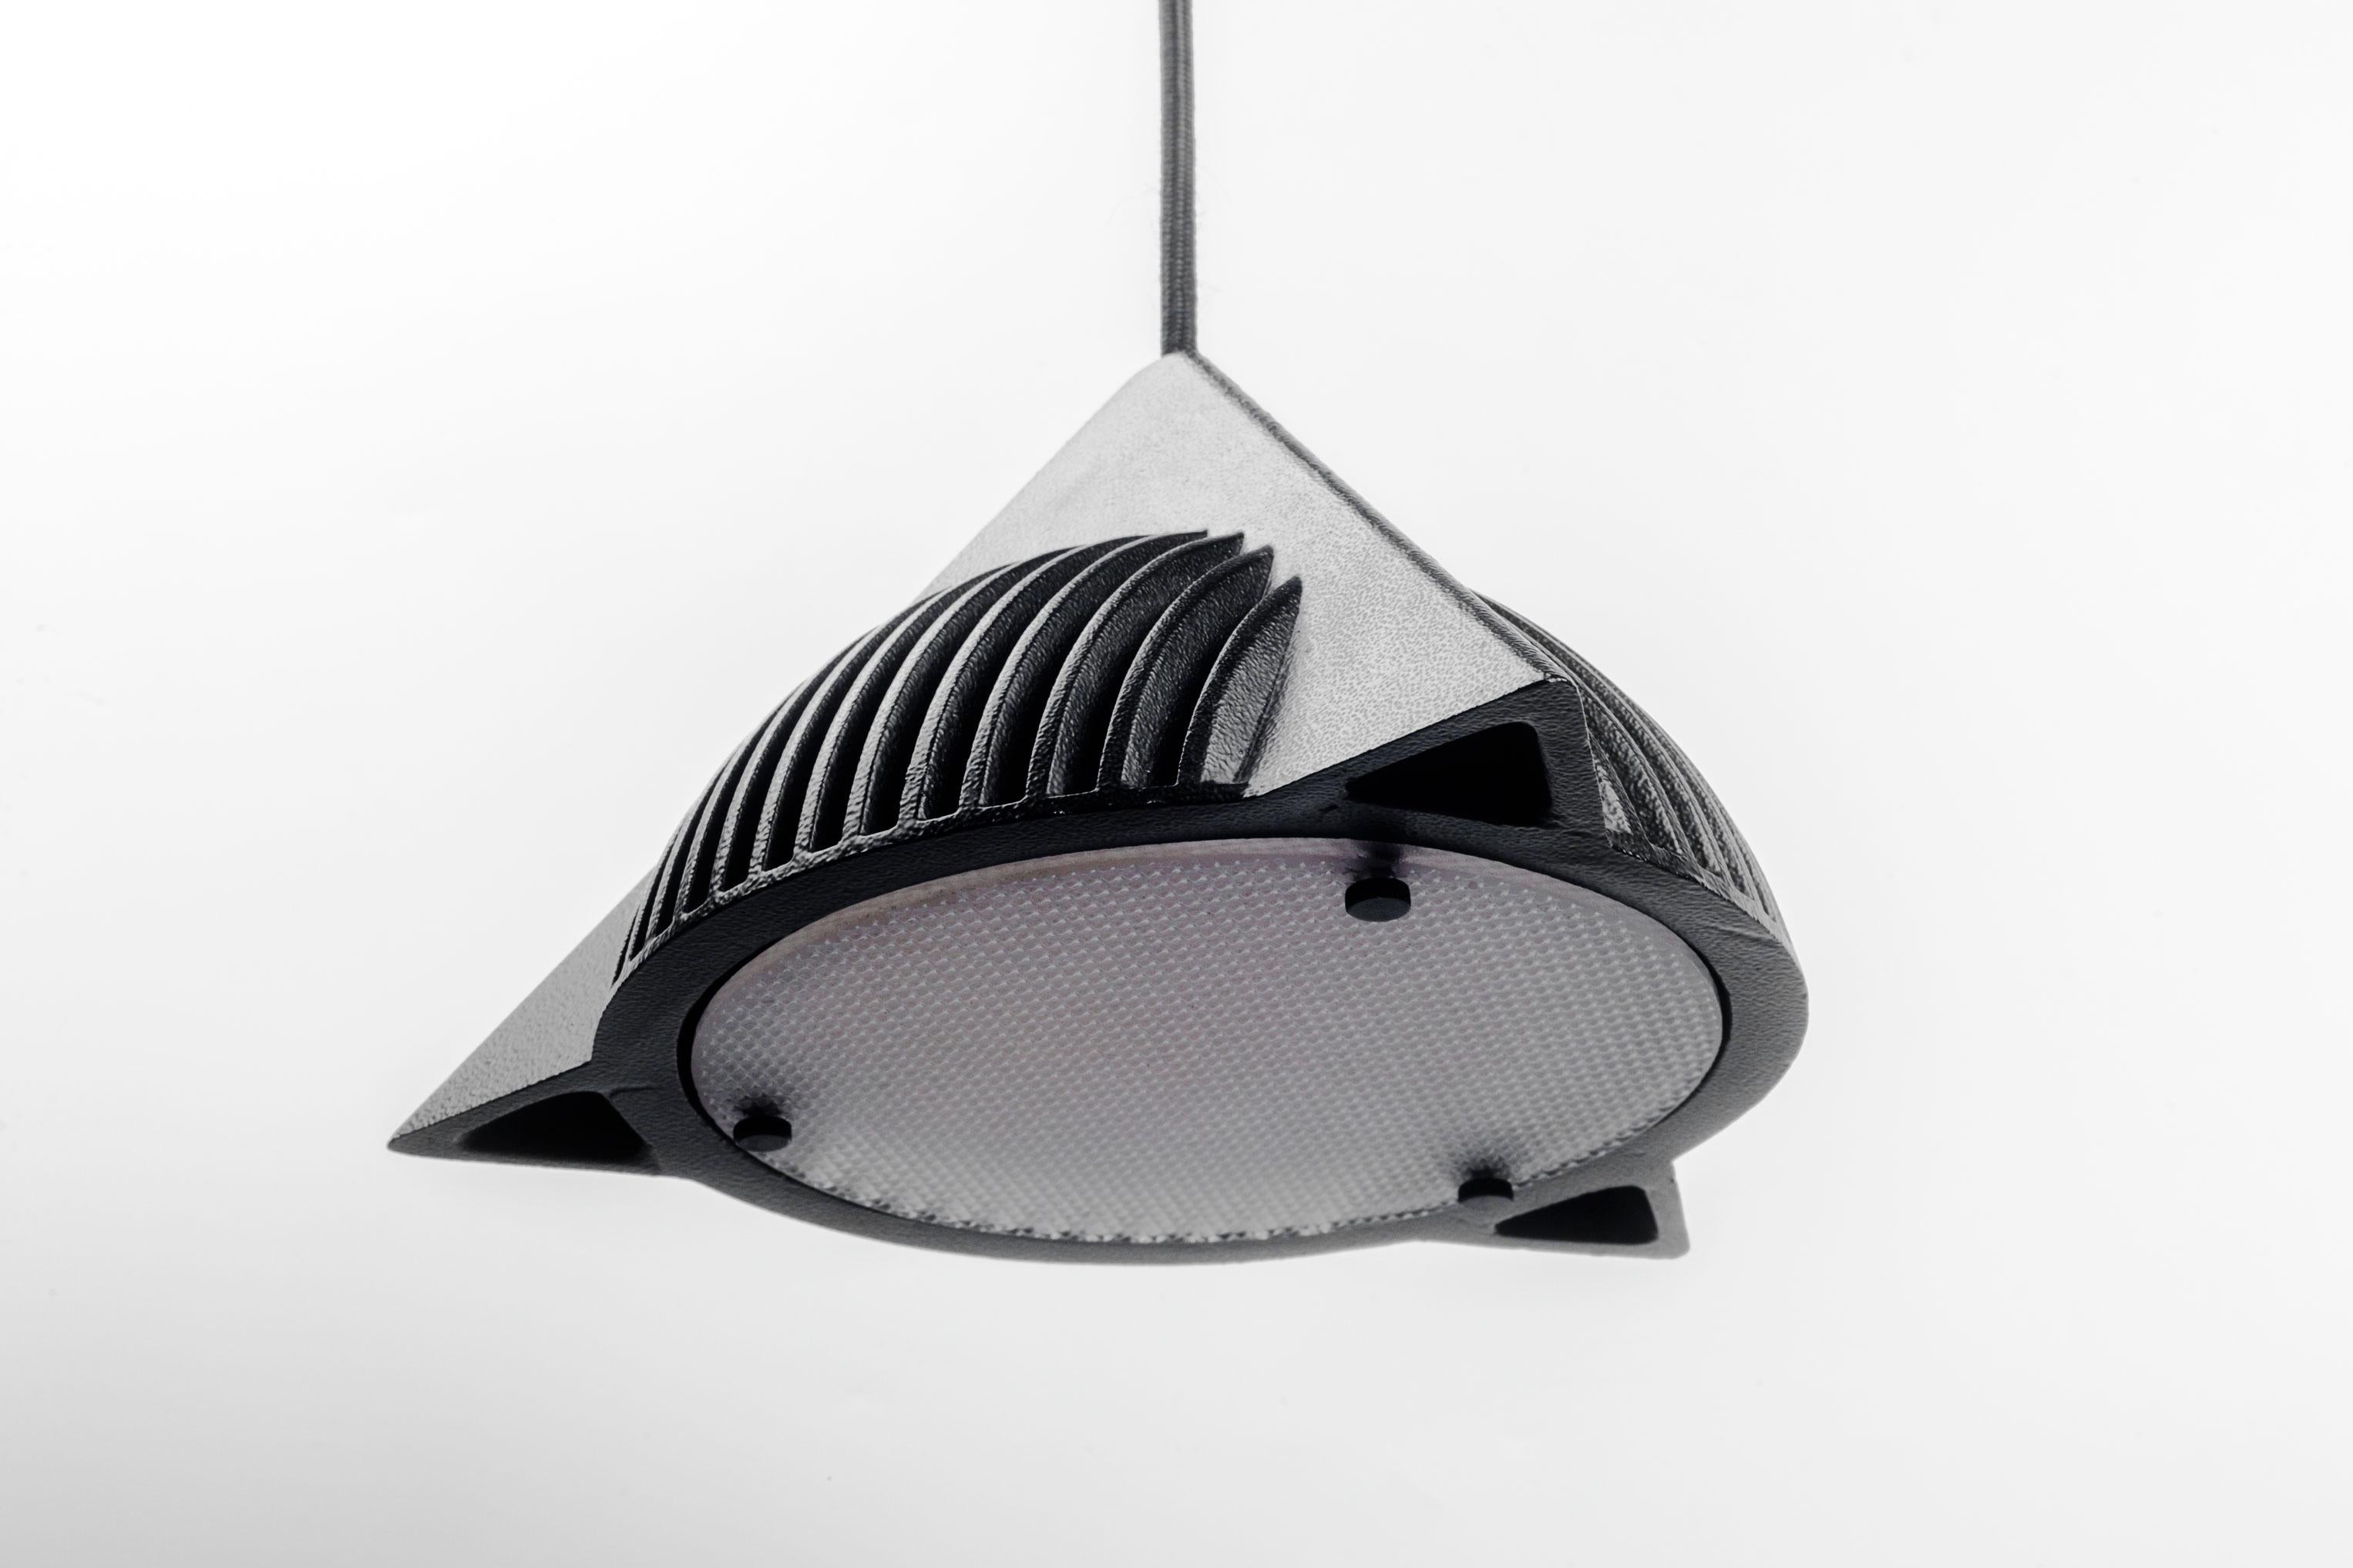 Black metal pyramid pendant with glass diffuser designed by Ron Rezek in the 1990s. A cast iron half sphere within a pyramid, floating like a UFO. Primary geometric shapes combined in a post-modern style that feels like a more elegant, mature